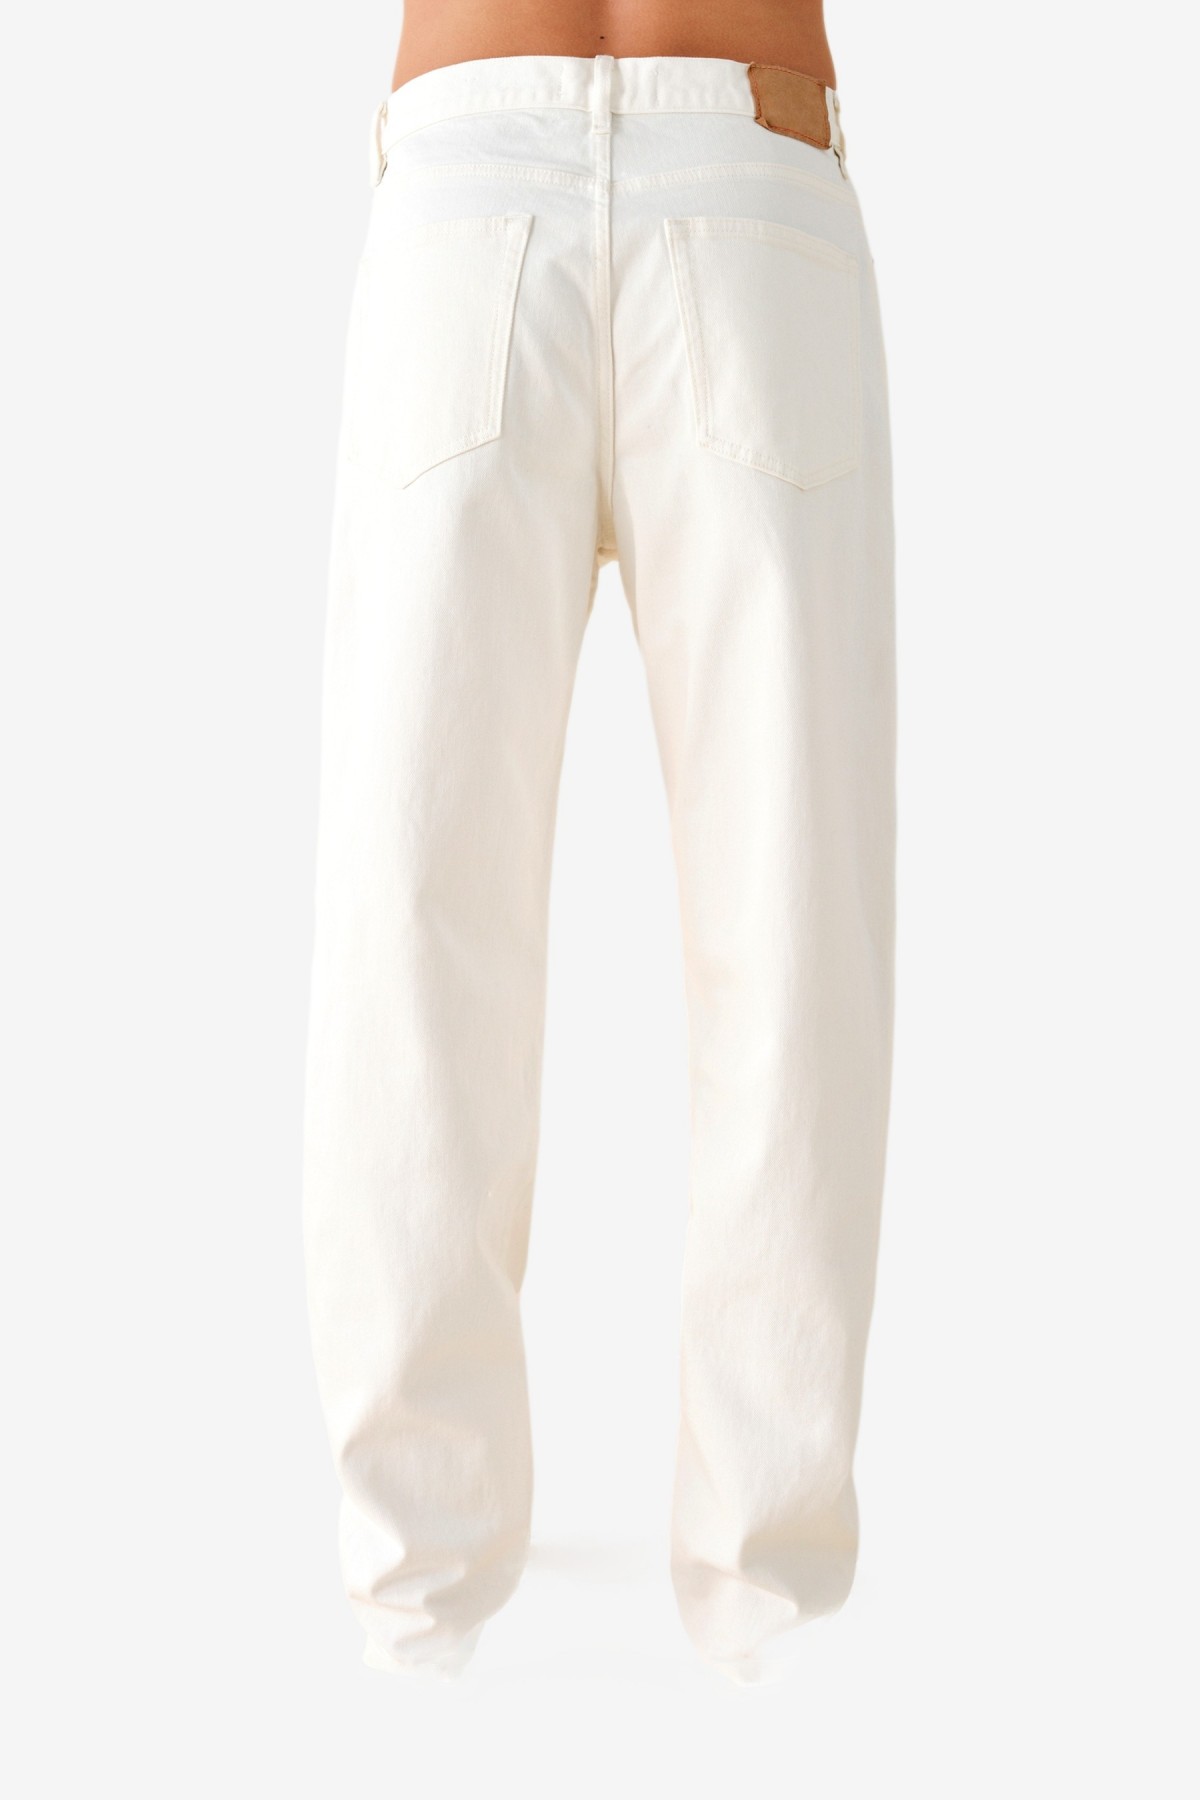 Jeanerica RM006 Reconstructed Jeans in Natural White